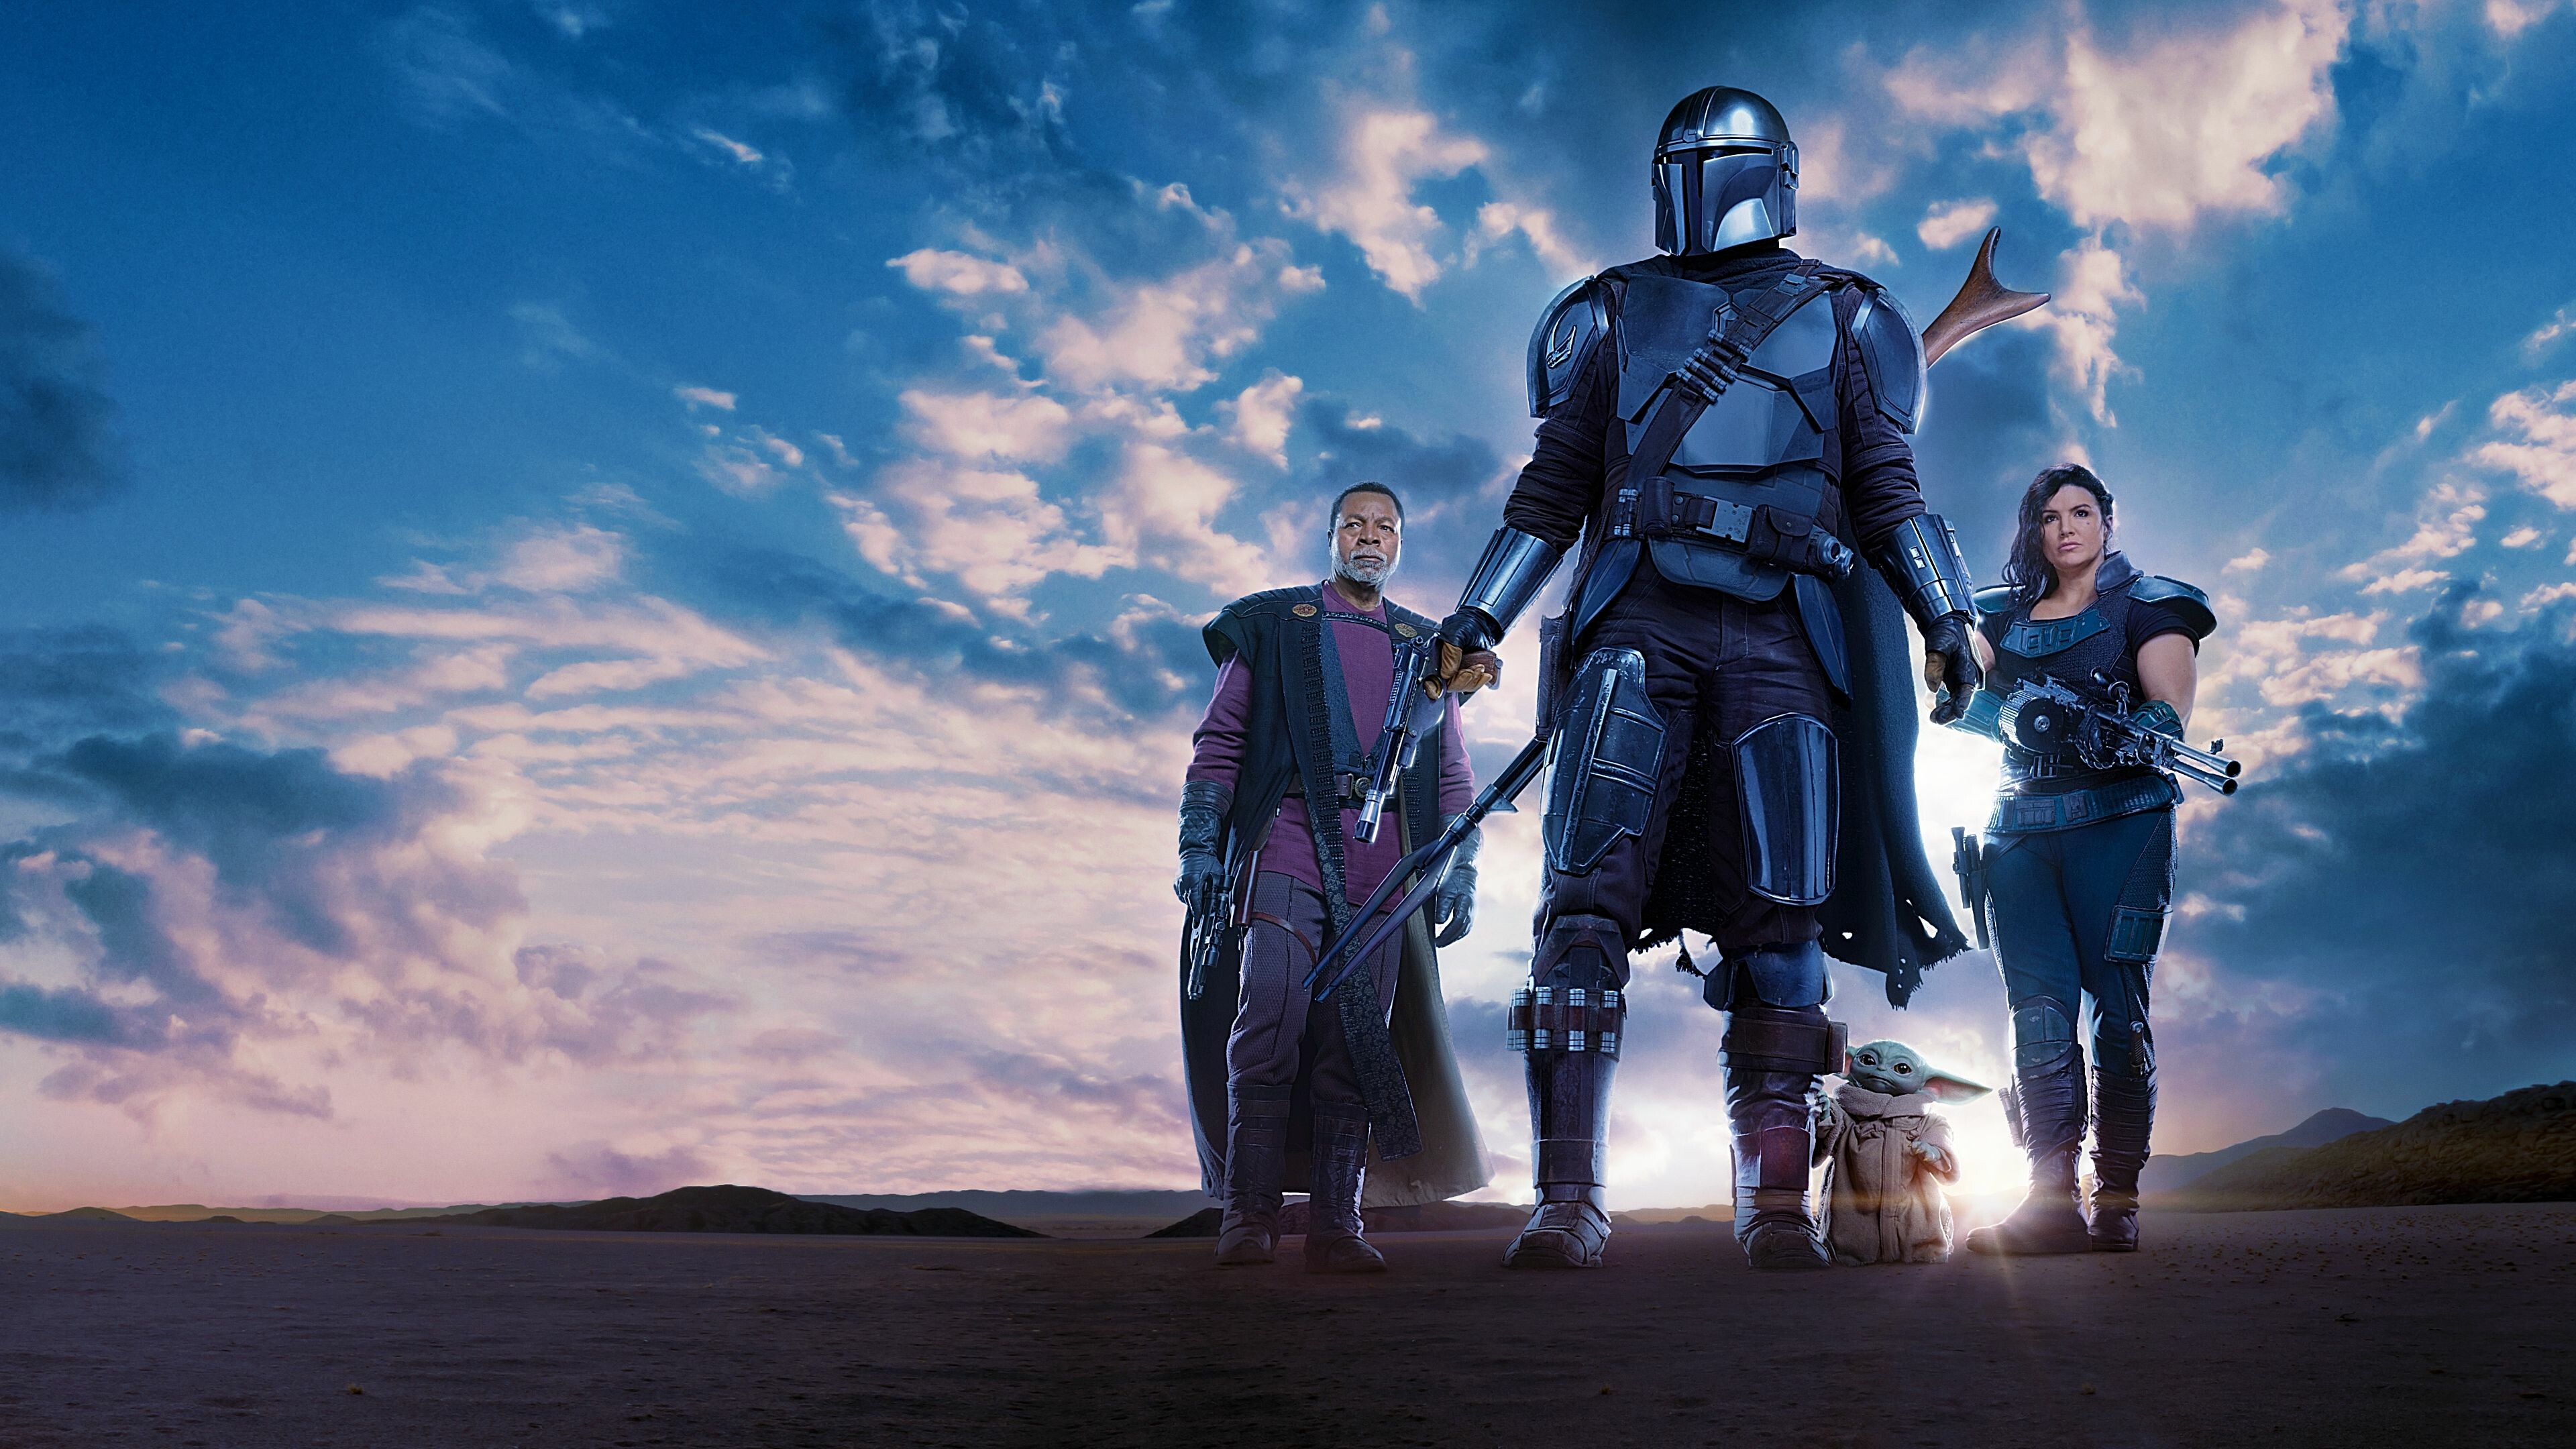 The Mandalorian: Season 2, Produced by Lucasfilm, Fairview Entertainment, and Golem Creations, with Jon Favreau serving as showrunner. 3840x2160 4K Background.